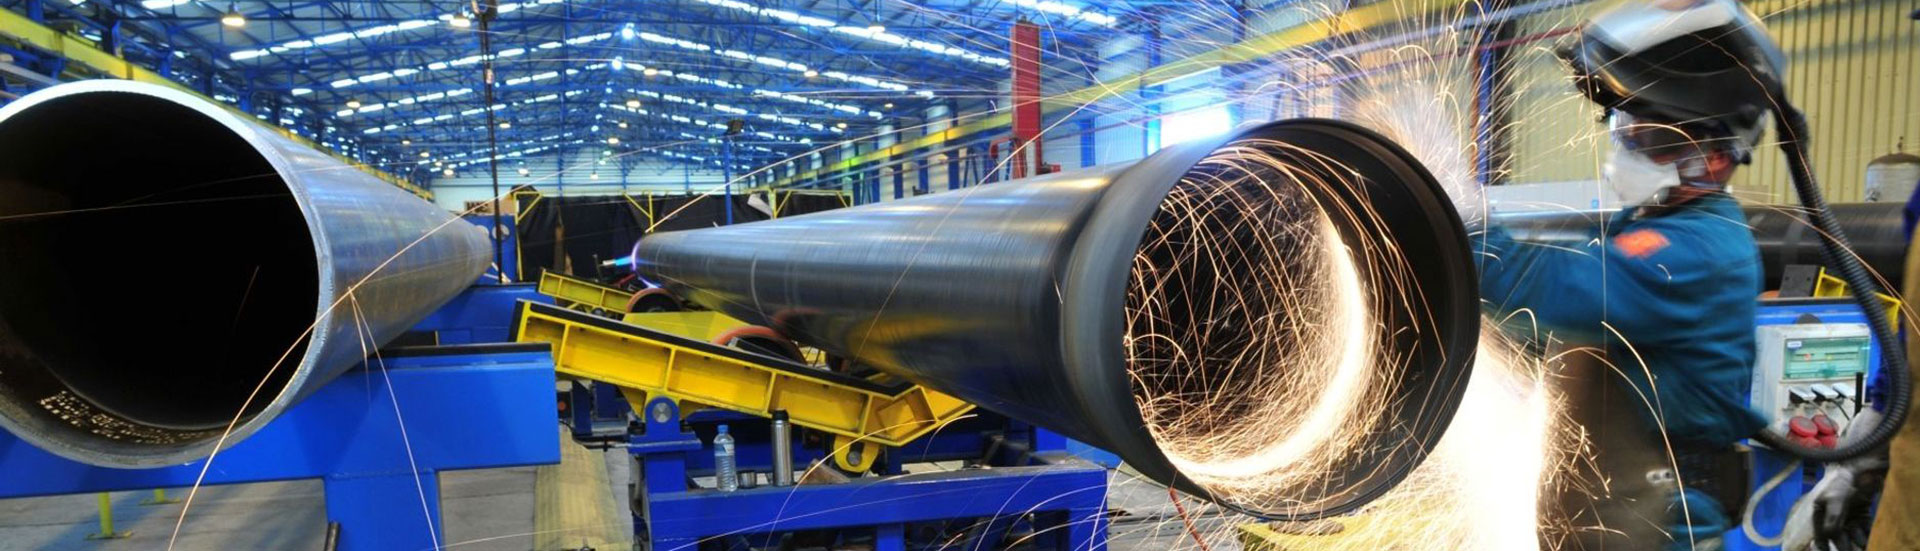 saw pipe,stainless steel screen pipe,fbe pipe